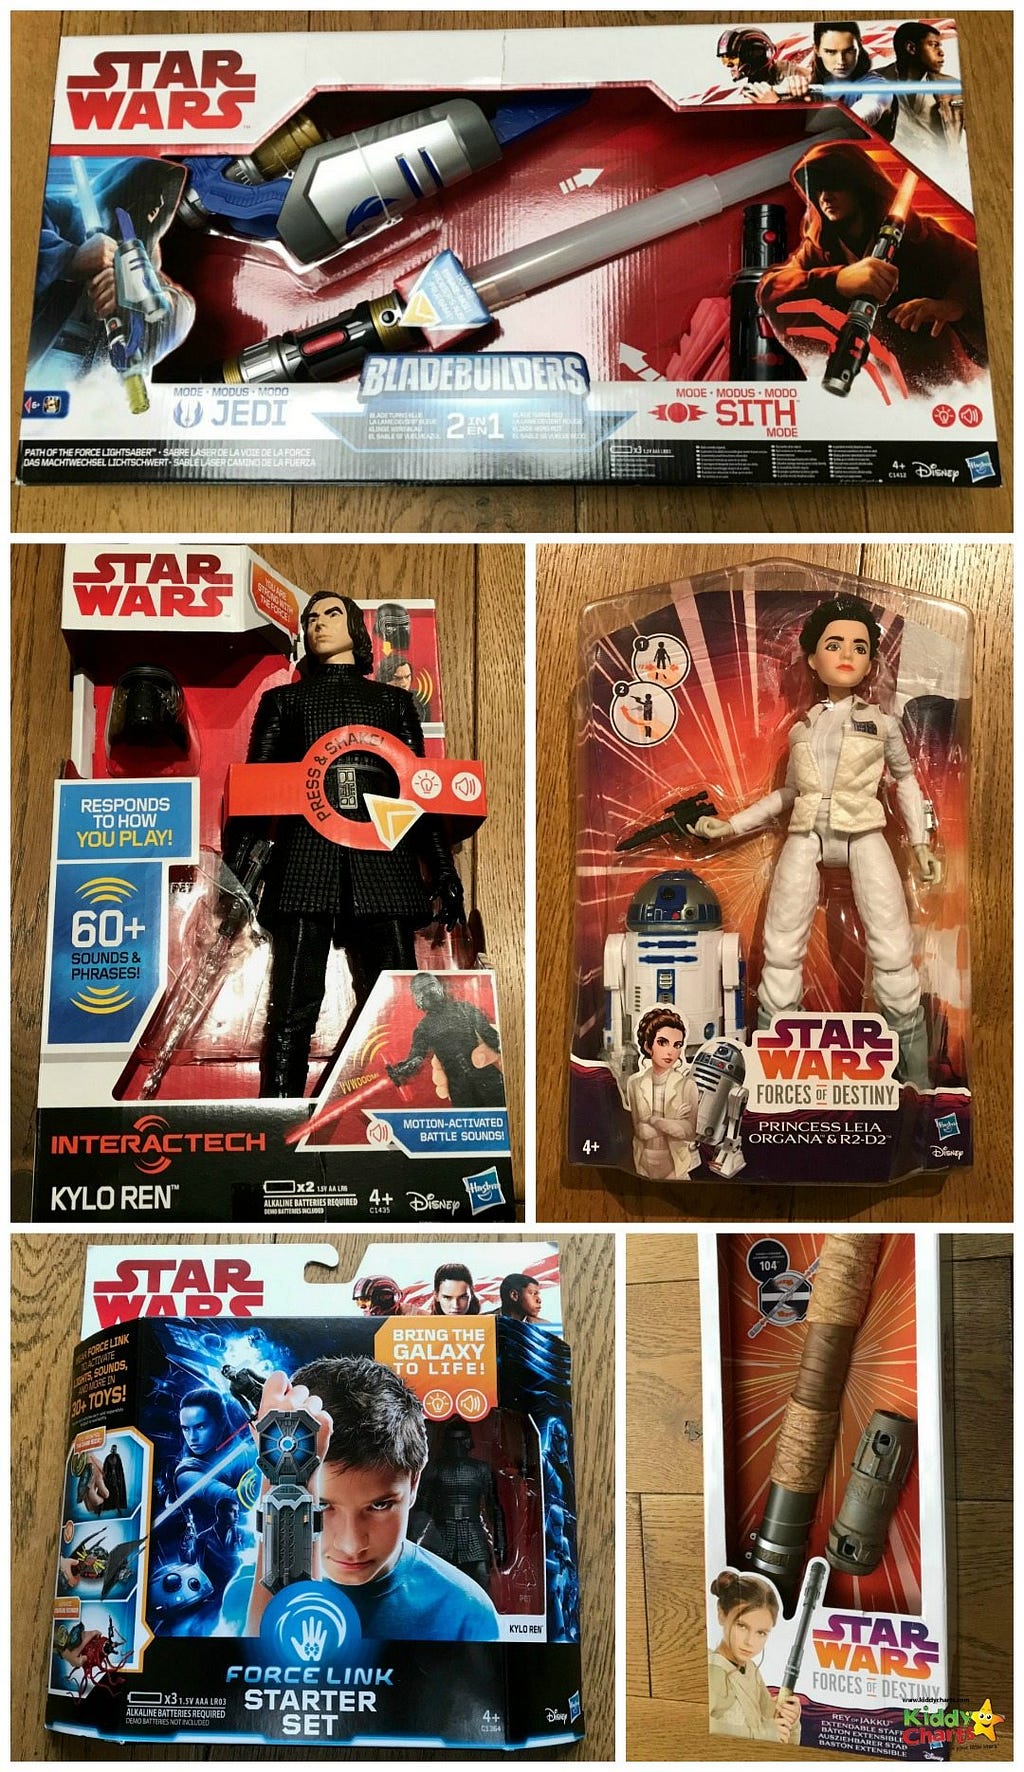 We have a Star Wars Last Jedi Toys review for you - and here they all are boxed and ready to go!